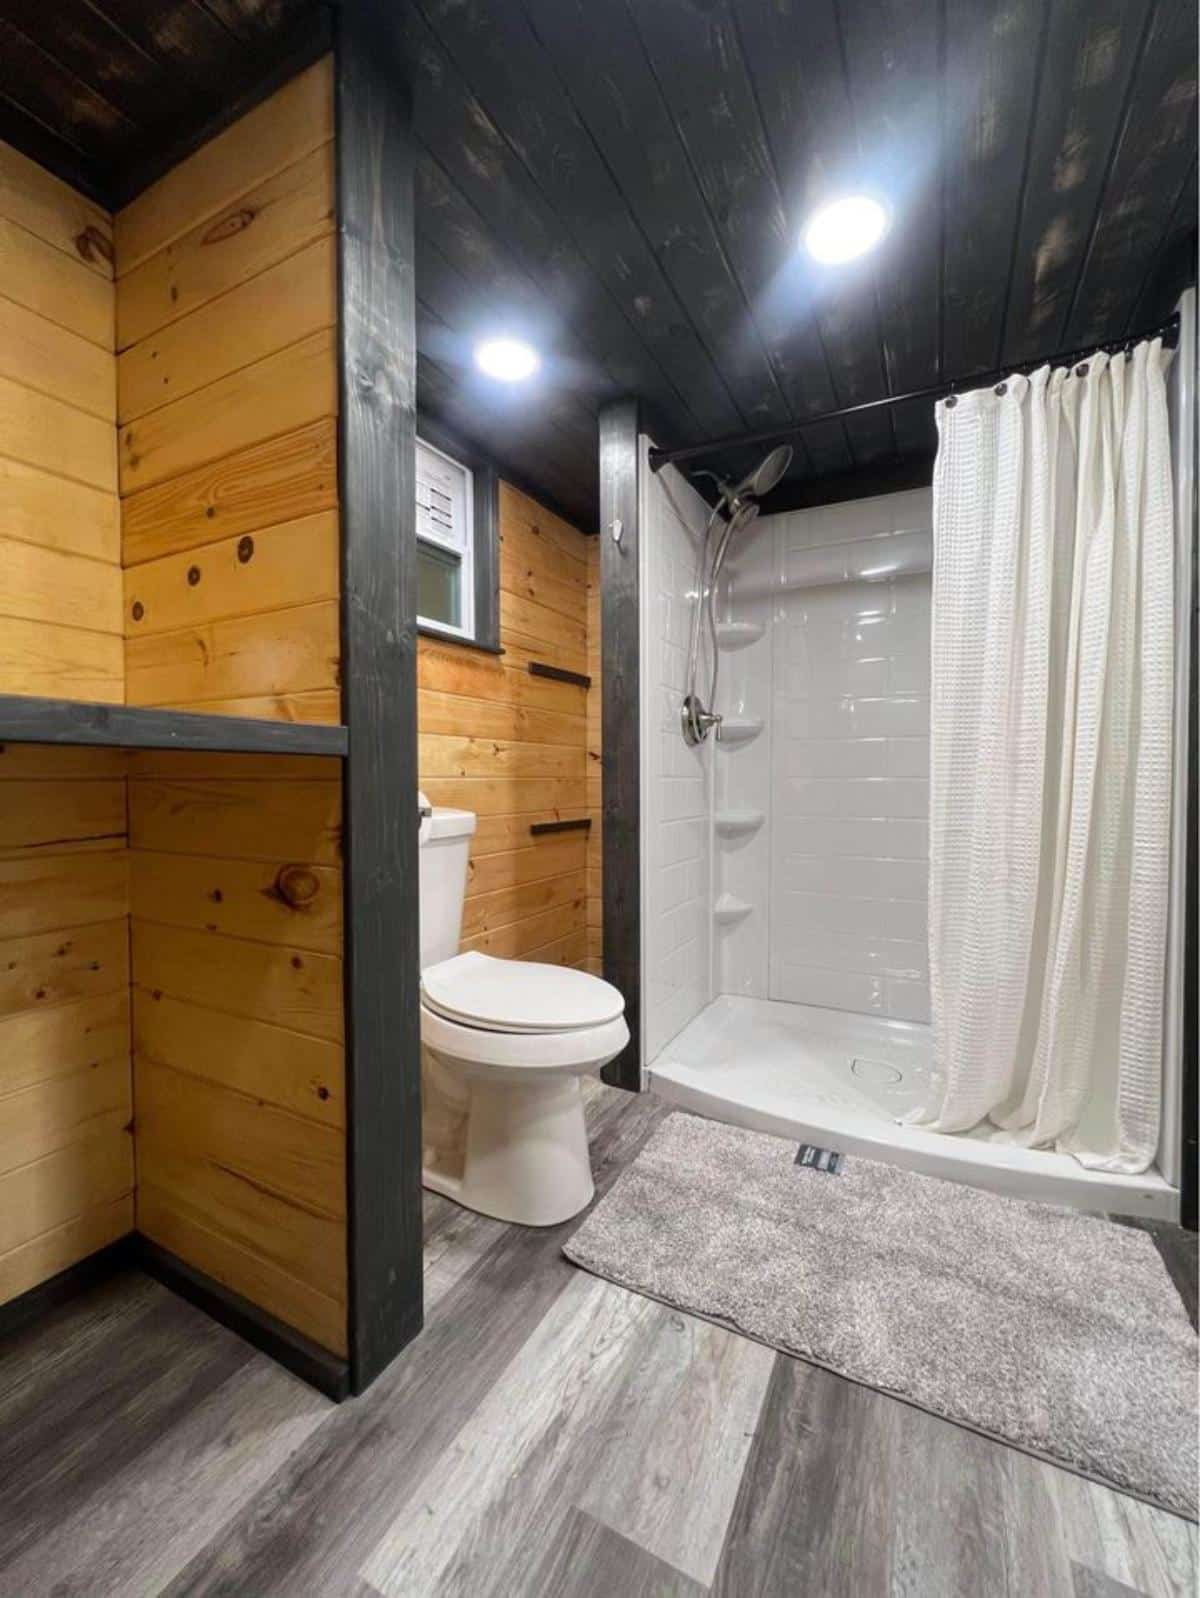 standard toilet and ample space in the bathroom